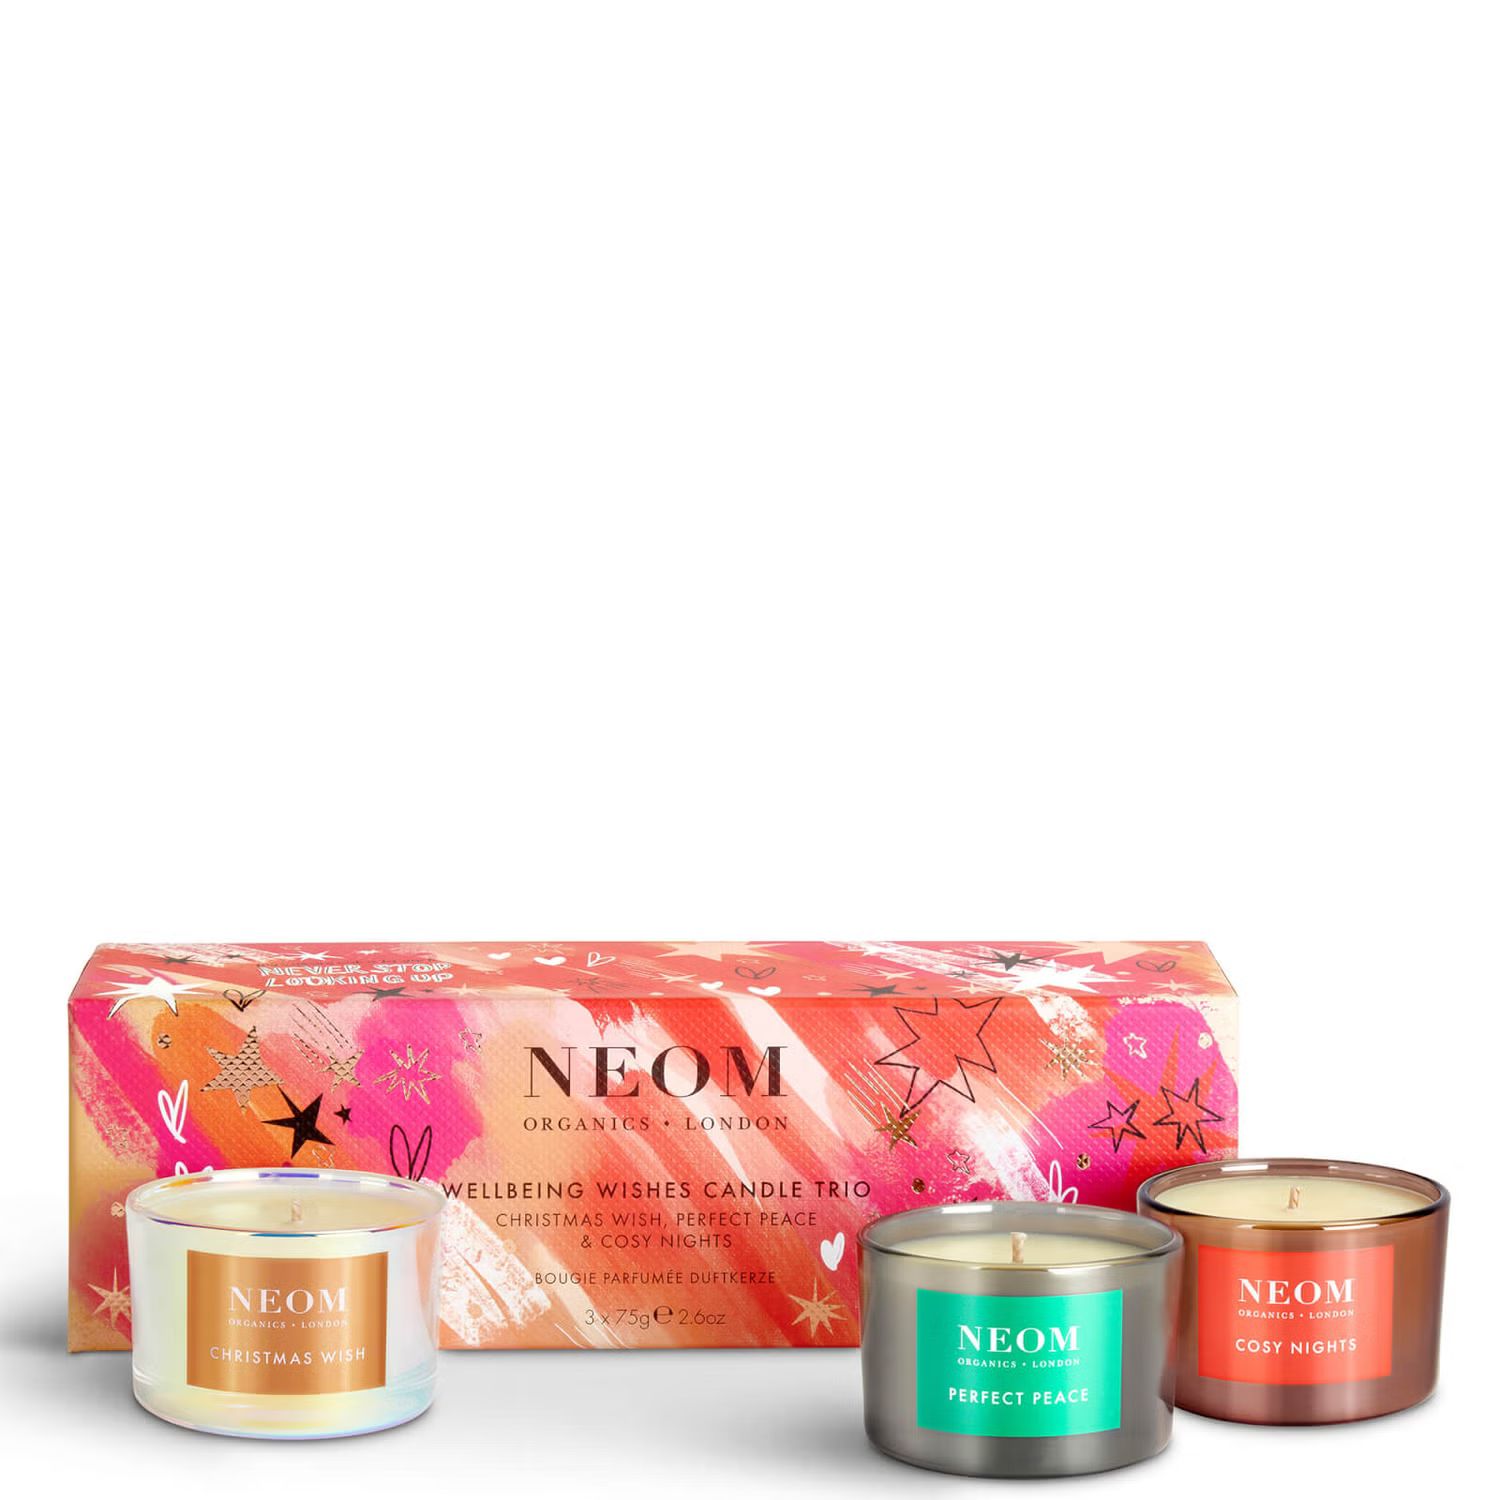 NEOM Wellbeing Wishes Candle Trio (Worth £57.00) | Look Fantastic (ROW)